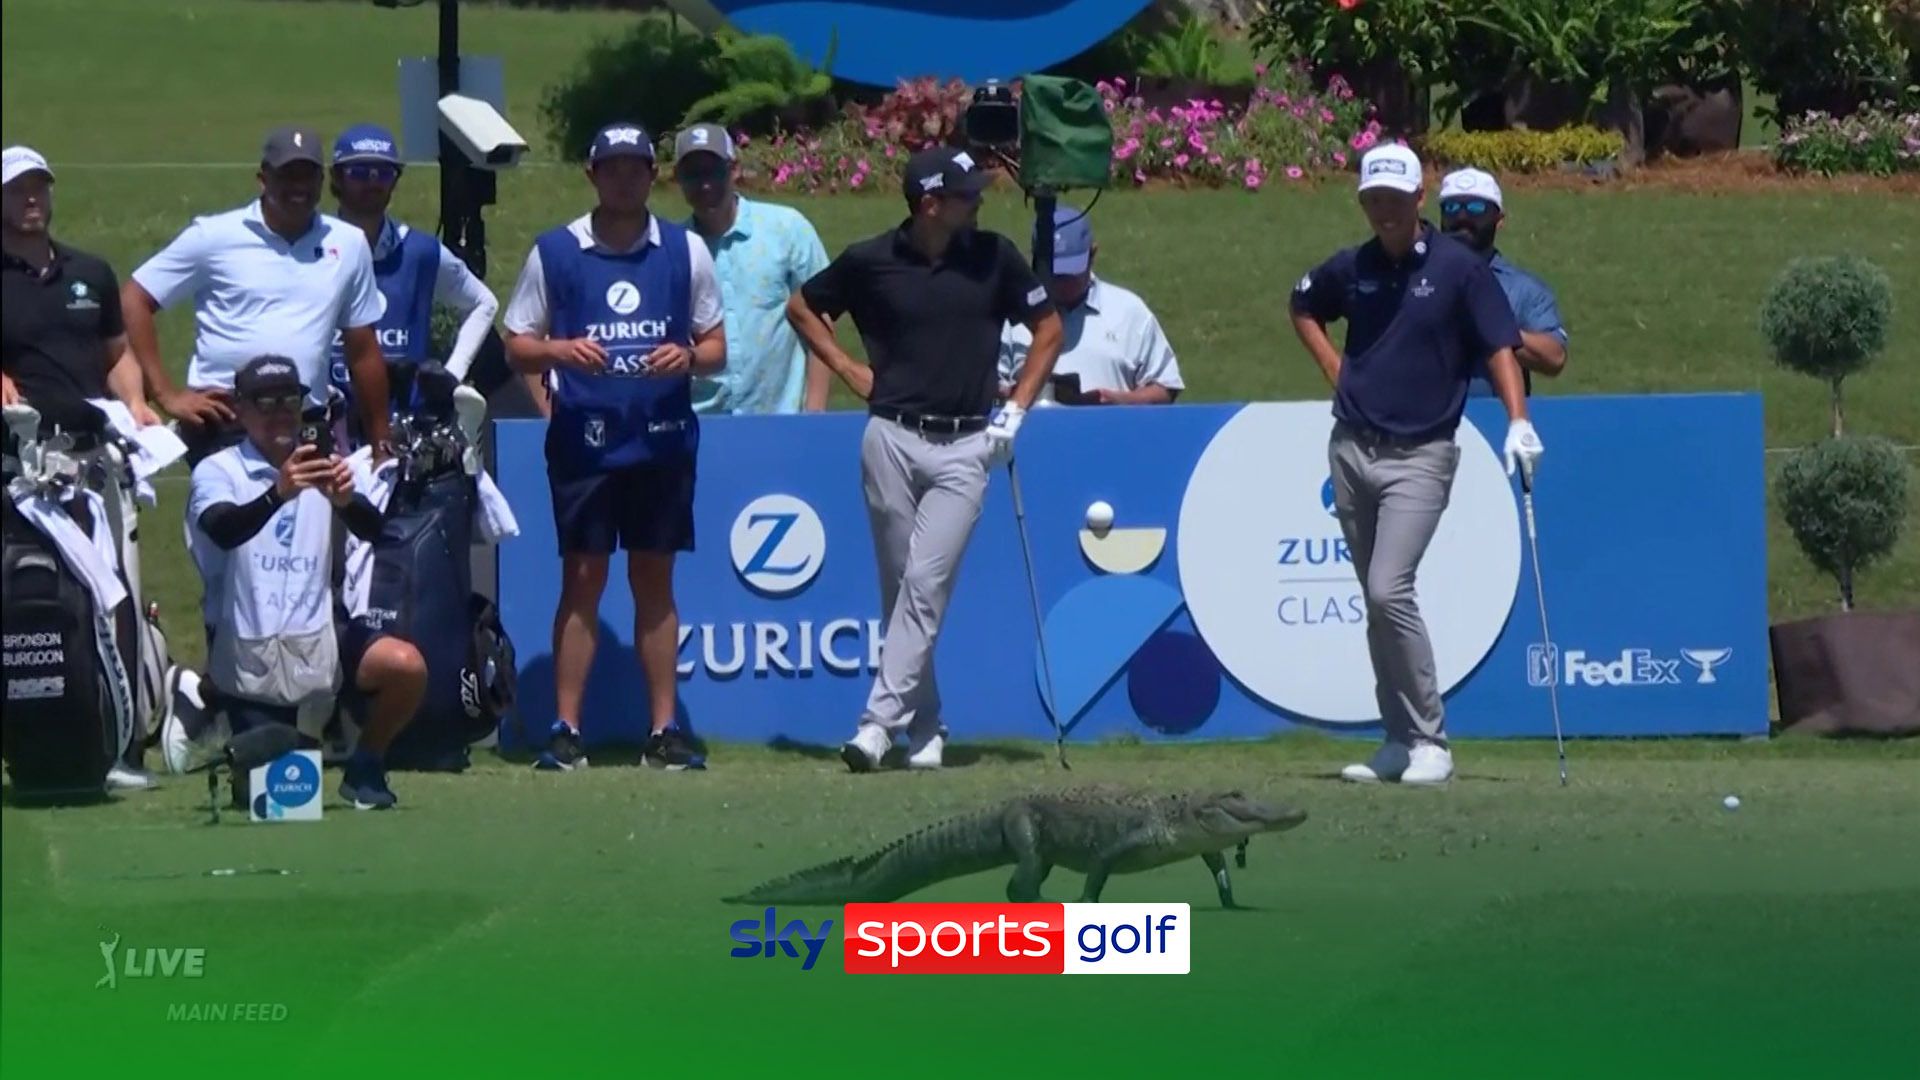 'Look out!' | Now on the tee...an alligator!